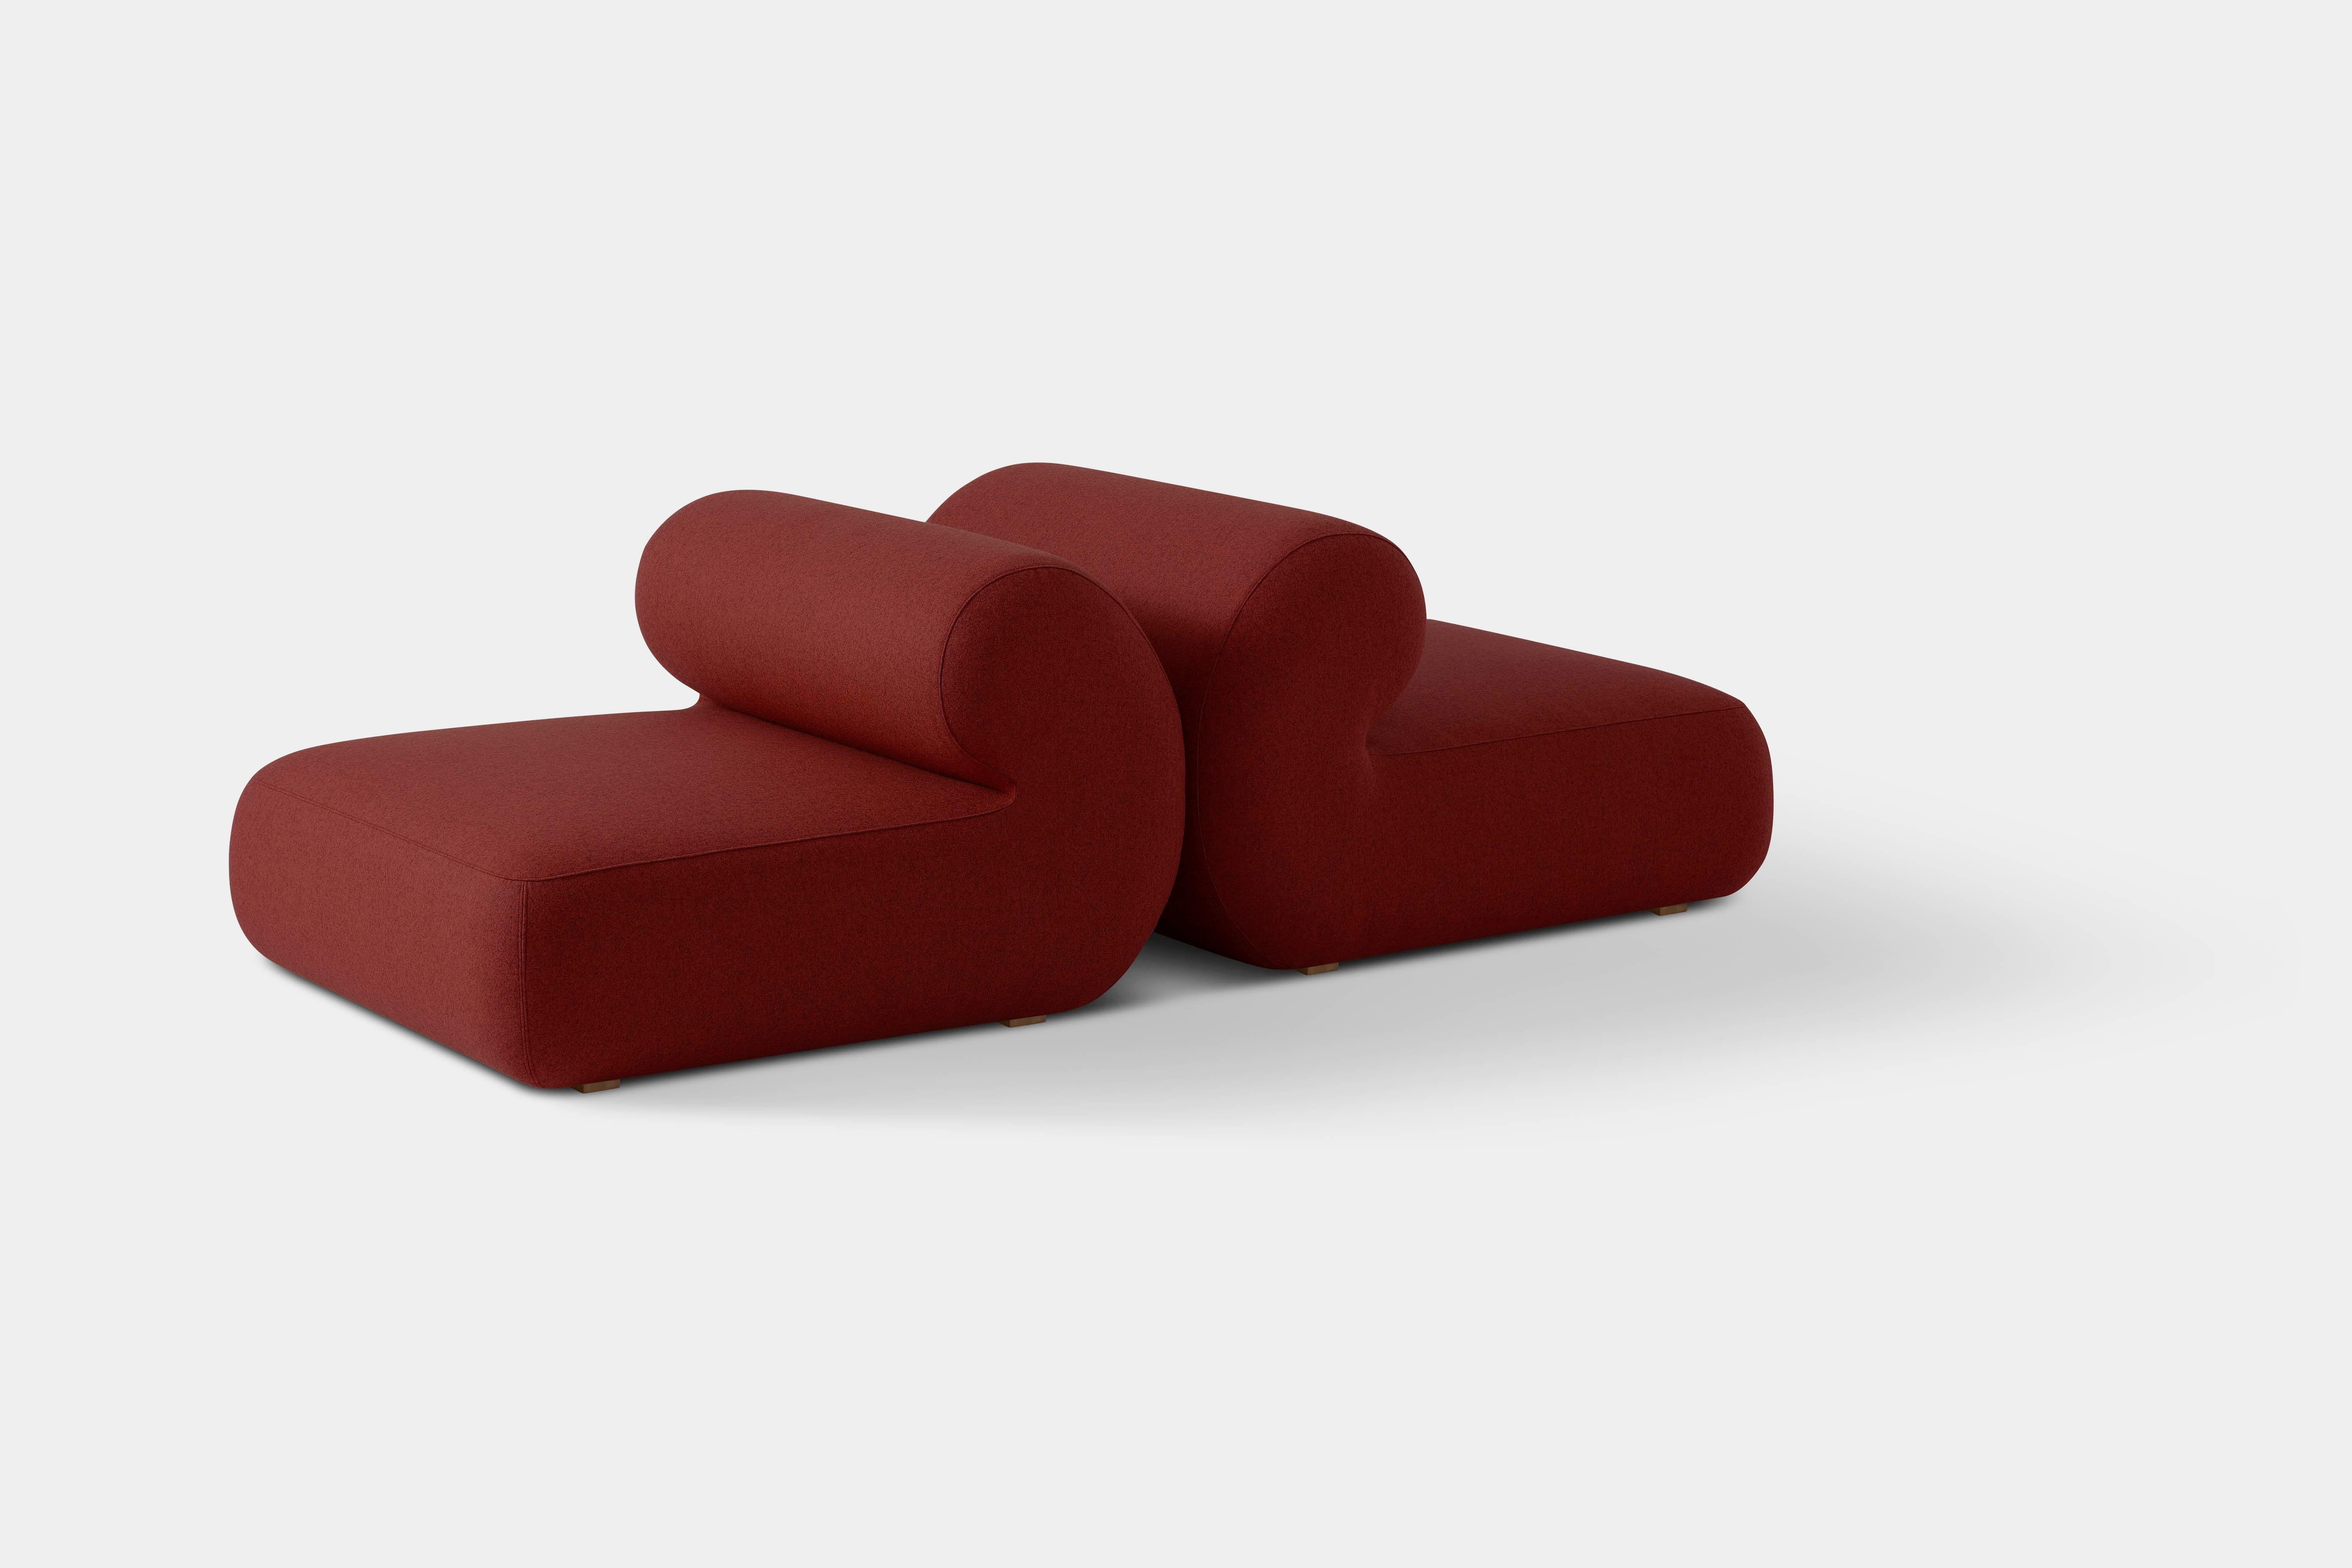 Red Set of 2 Michelin Straight Module by Pepe Albargues
Dimensions: W 103 x D 113 x H 71 cm
Materials: Pinewood, plywood and tablex structure.
Foam CMHR (high resilience and flame retardant) for all our cushion filling systems.
Lacquered beech wood